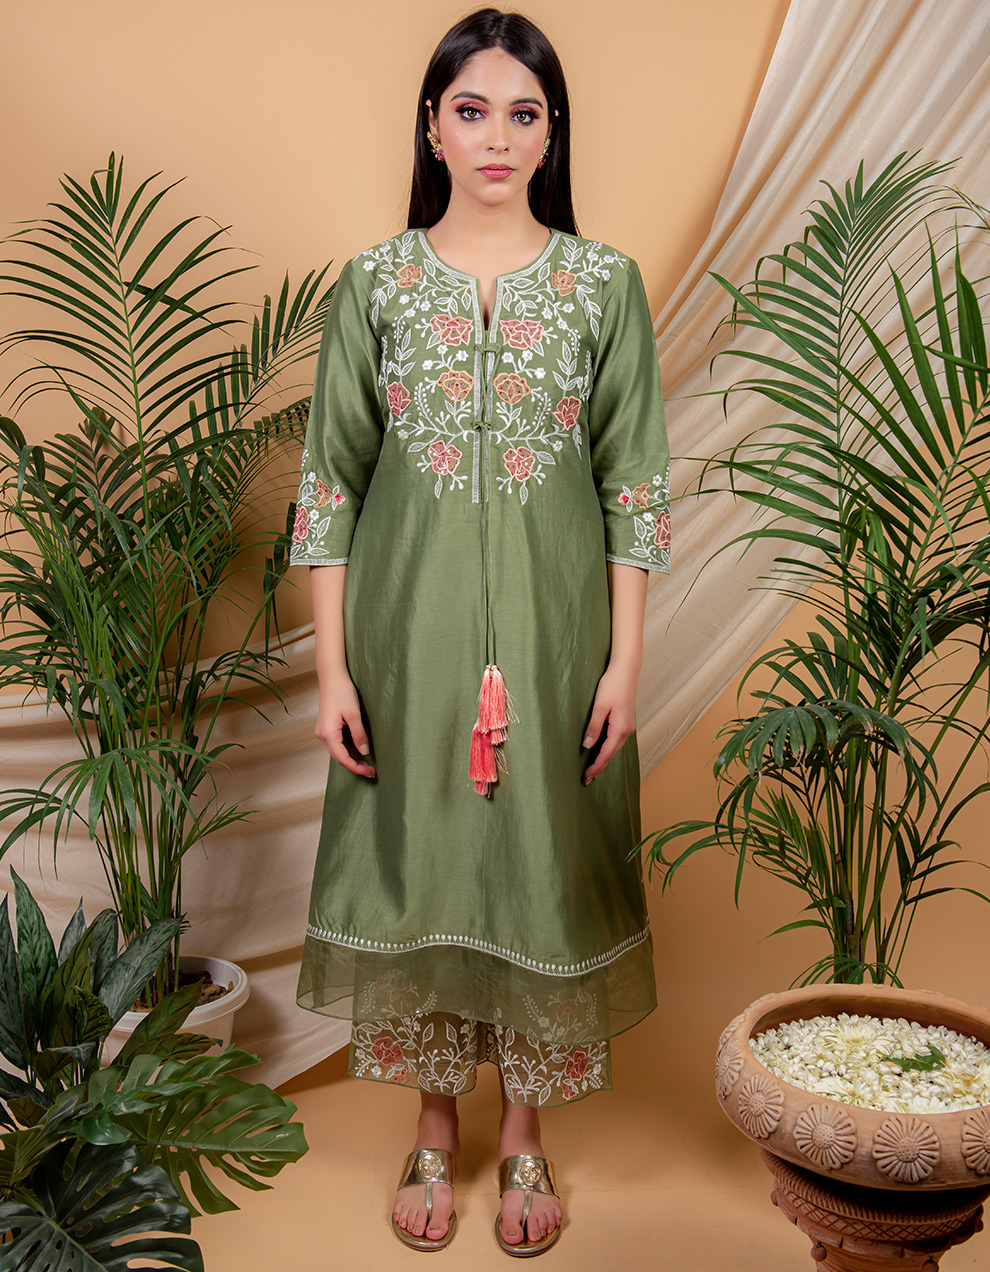 green-Green-chanderi-silk-kurta-designs-for-ladies-in-India-at-the-best-prices